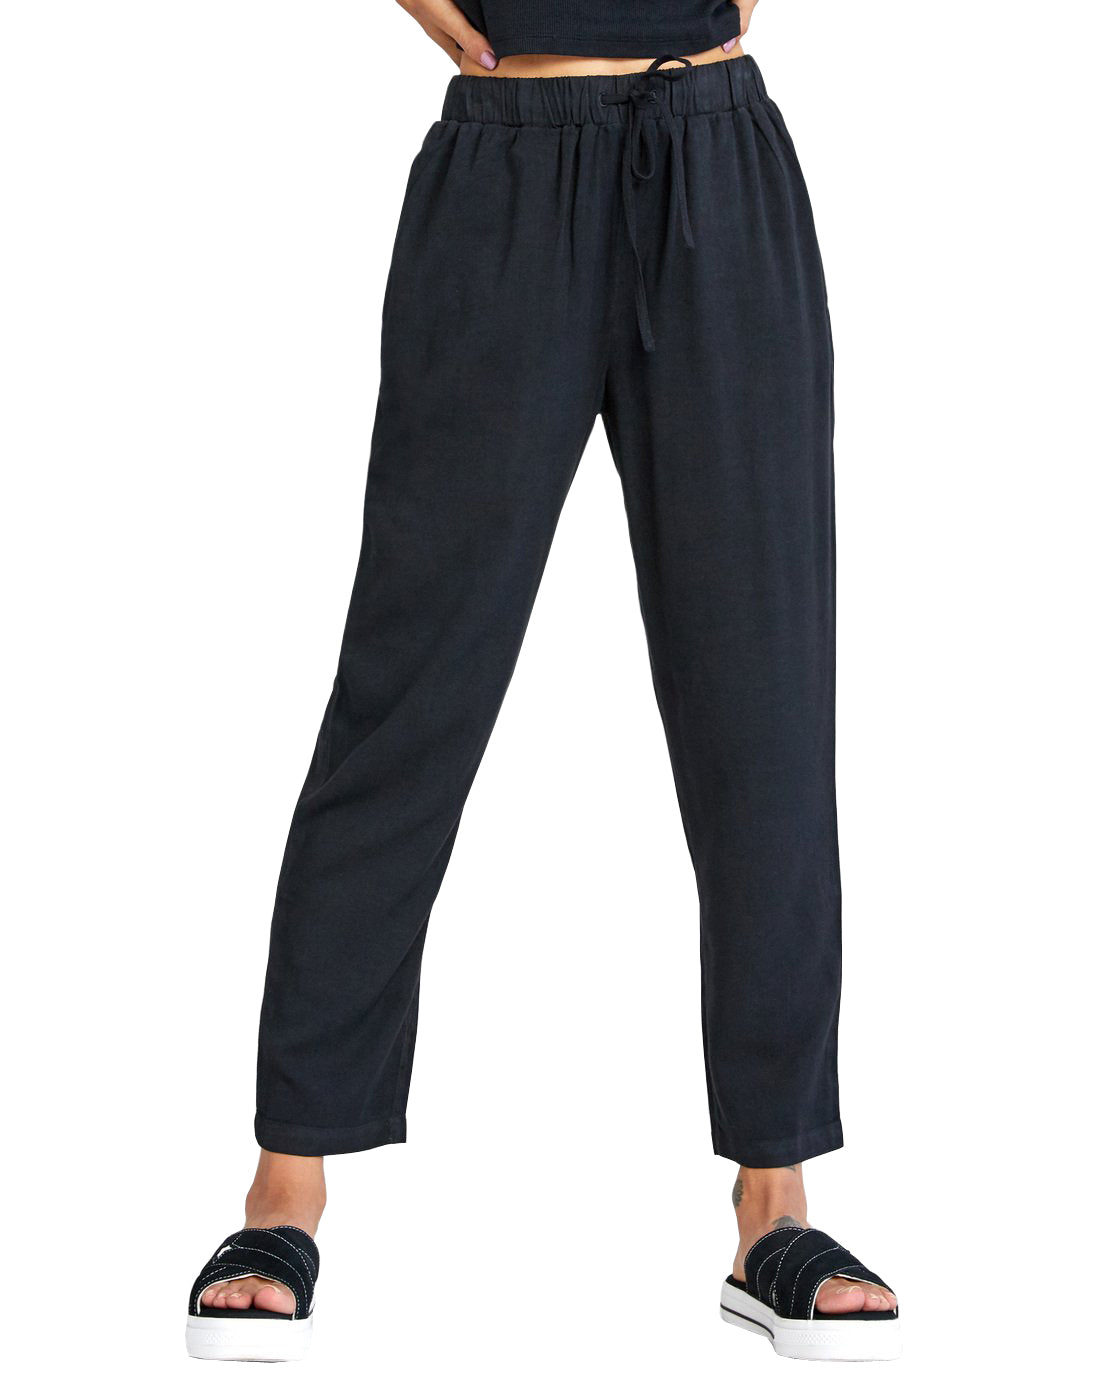 RVCA  Blank Stare Relaxed Fit Pants BLK XS